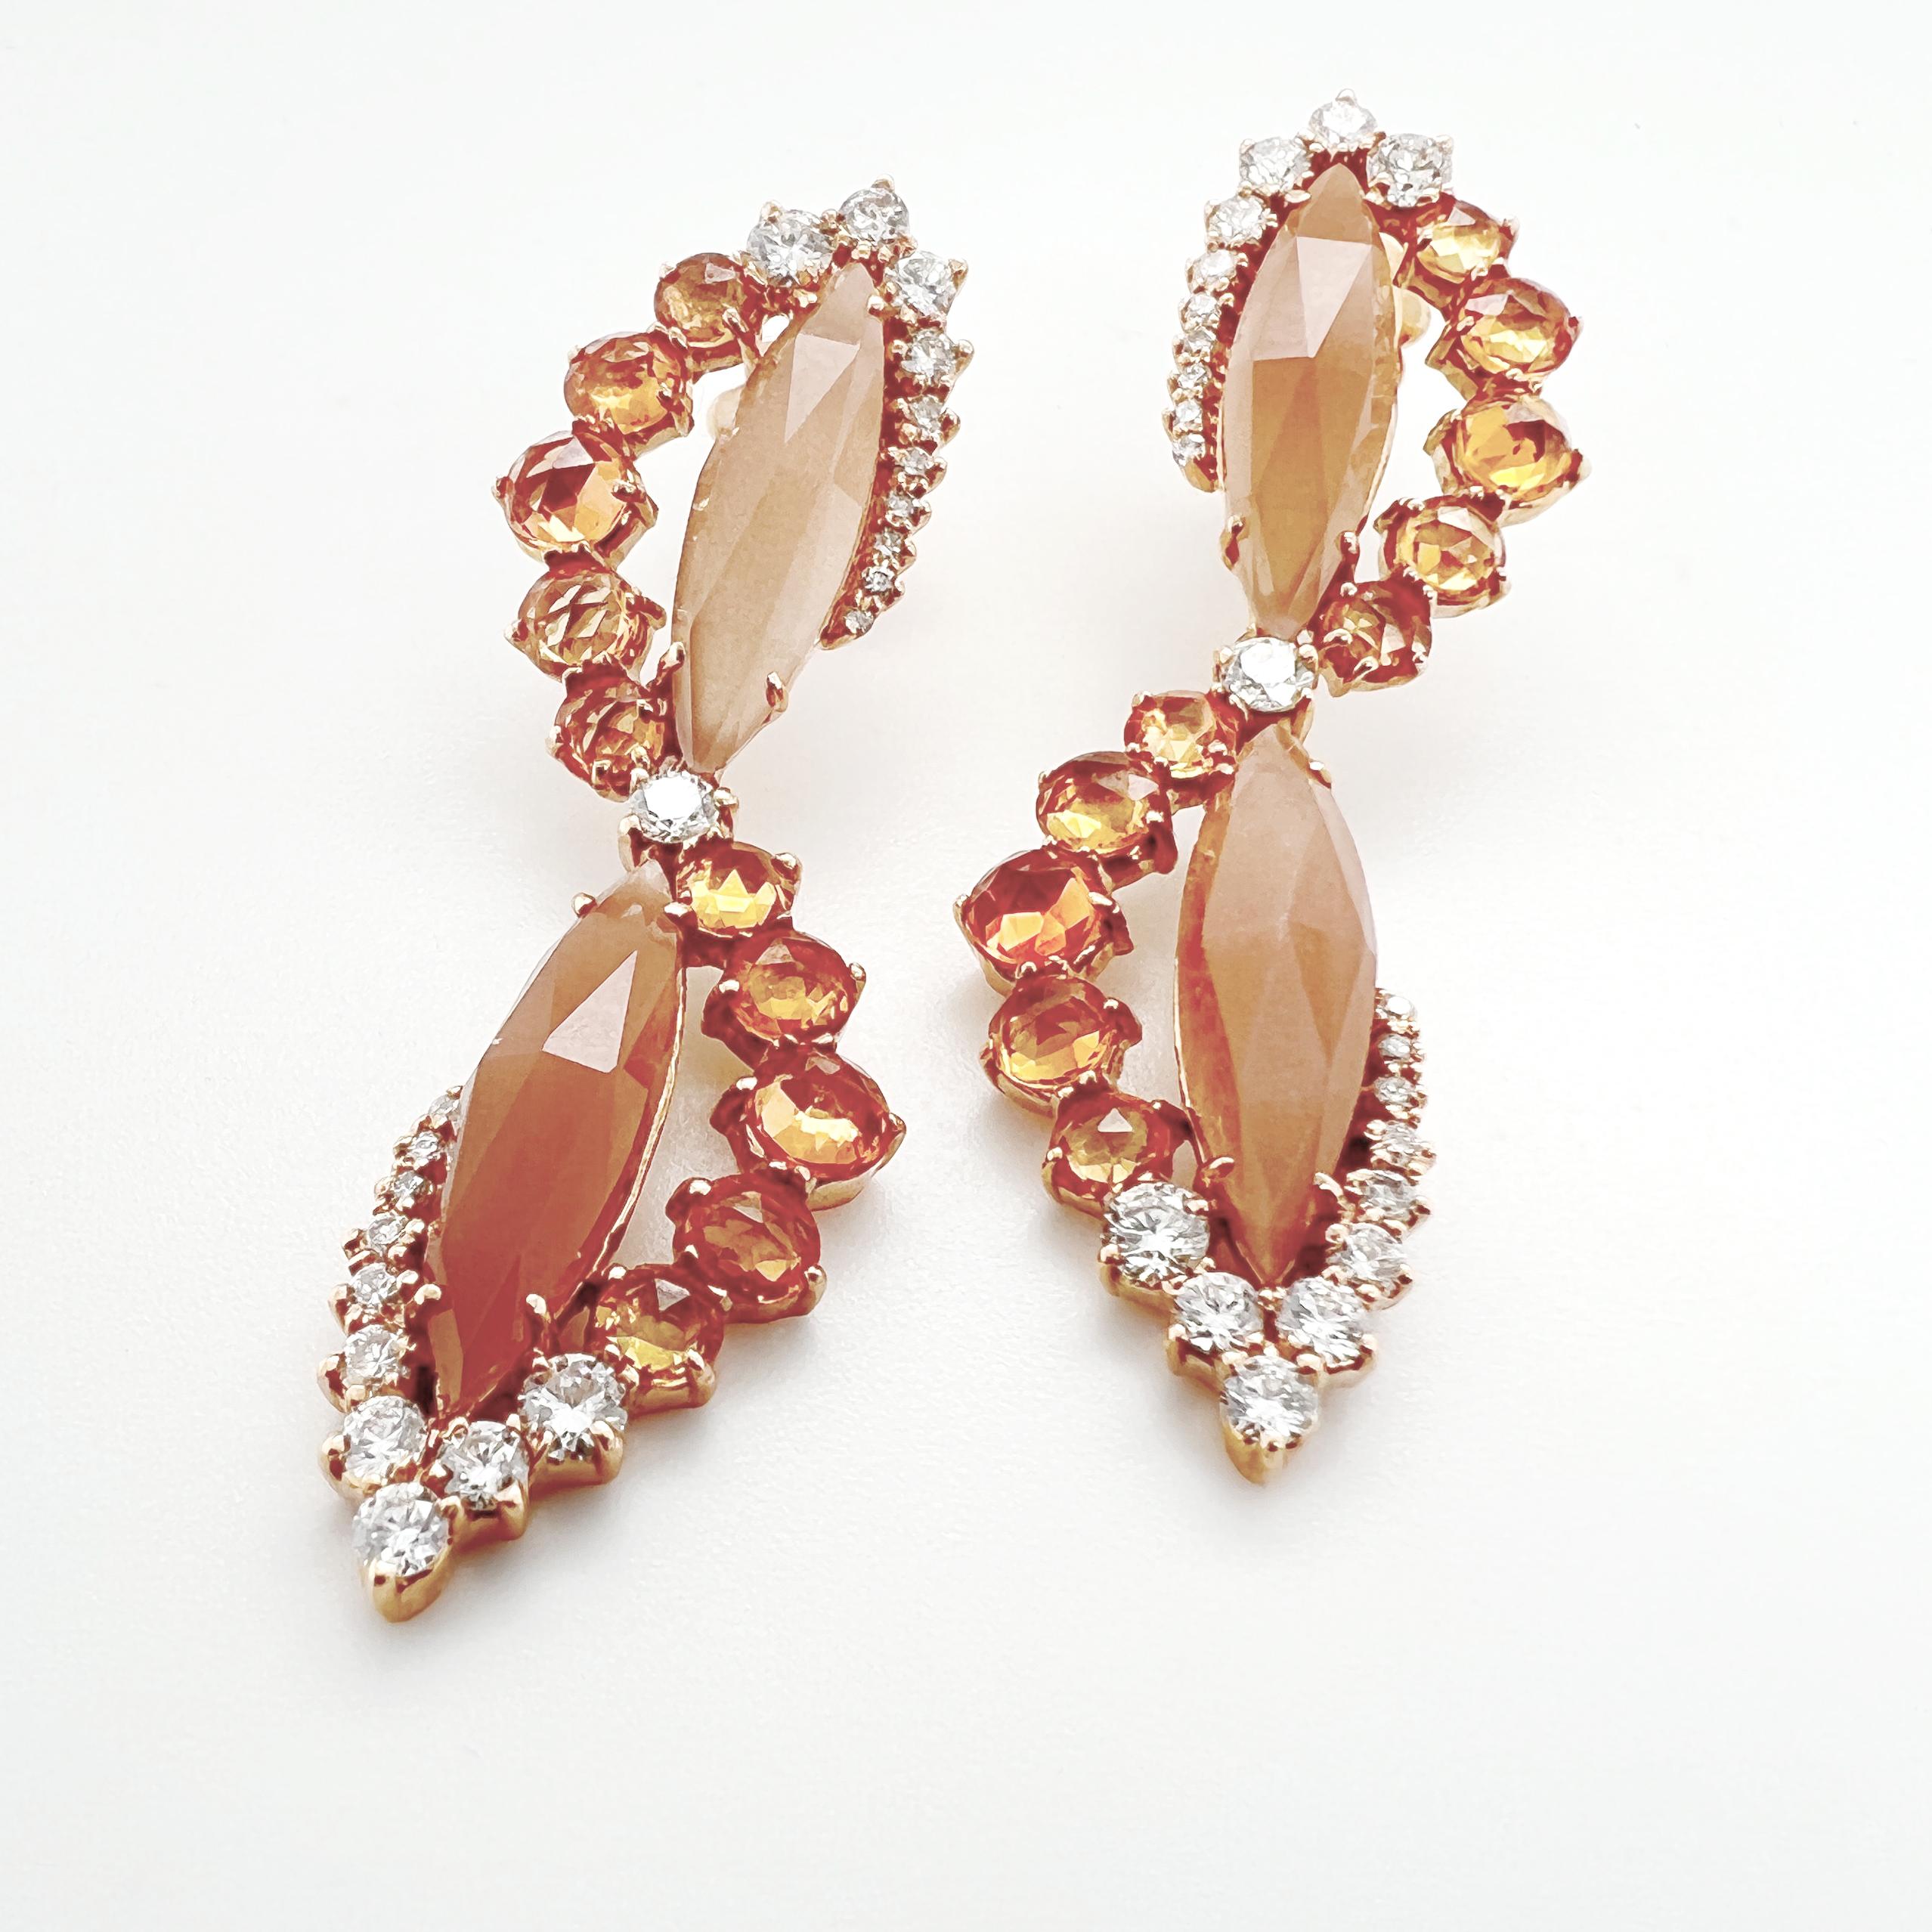 These earrings are crafted in 18kt pink gold and feature a stunning combination of orange moonstone, orange sapphires, and natural diamonds. The orange moonstone has a captivating and mysterious quality, with a shimmering play of orange and pink